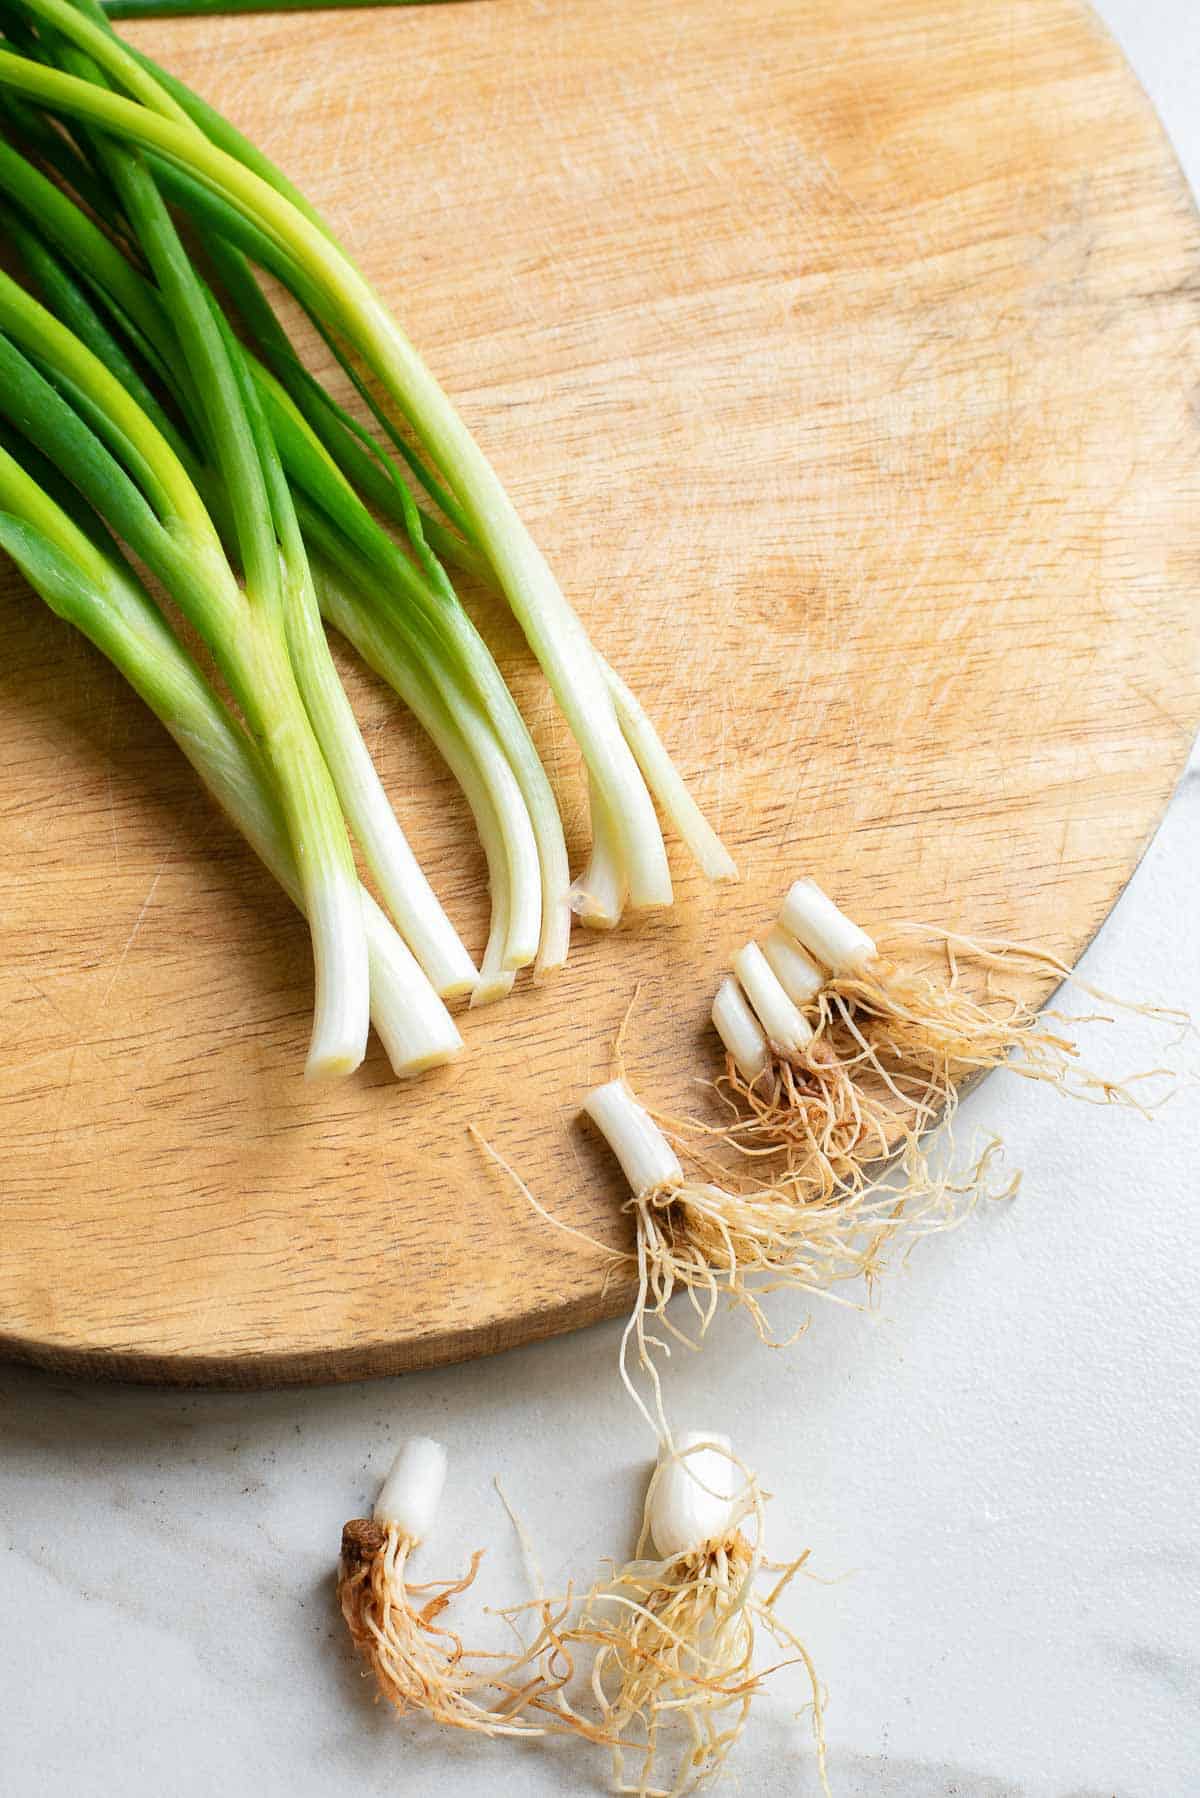 Chopping off the ends of a bunch of scallions.